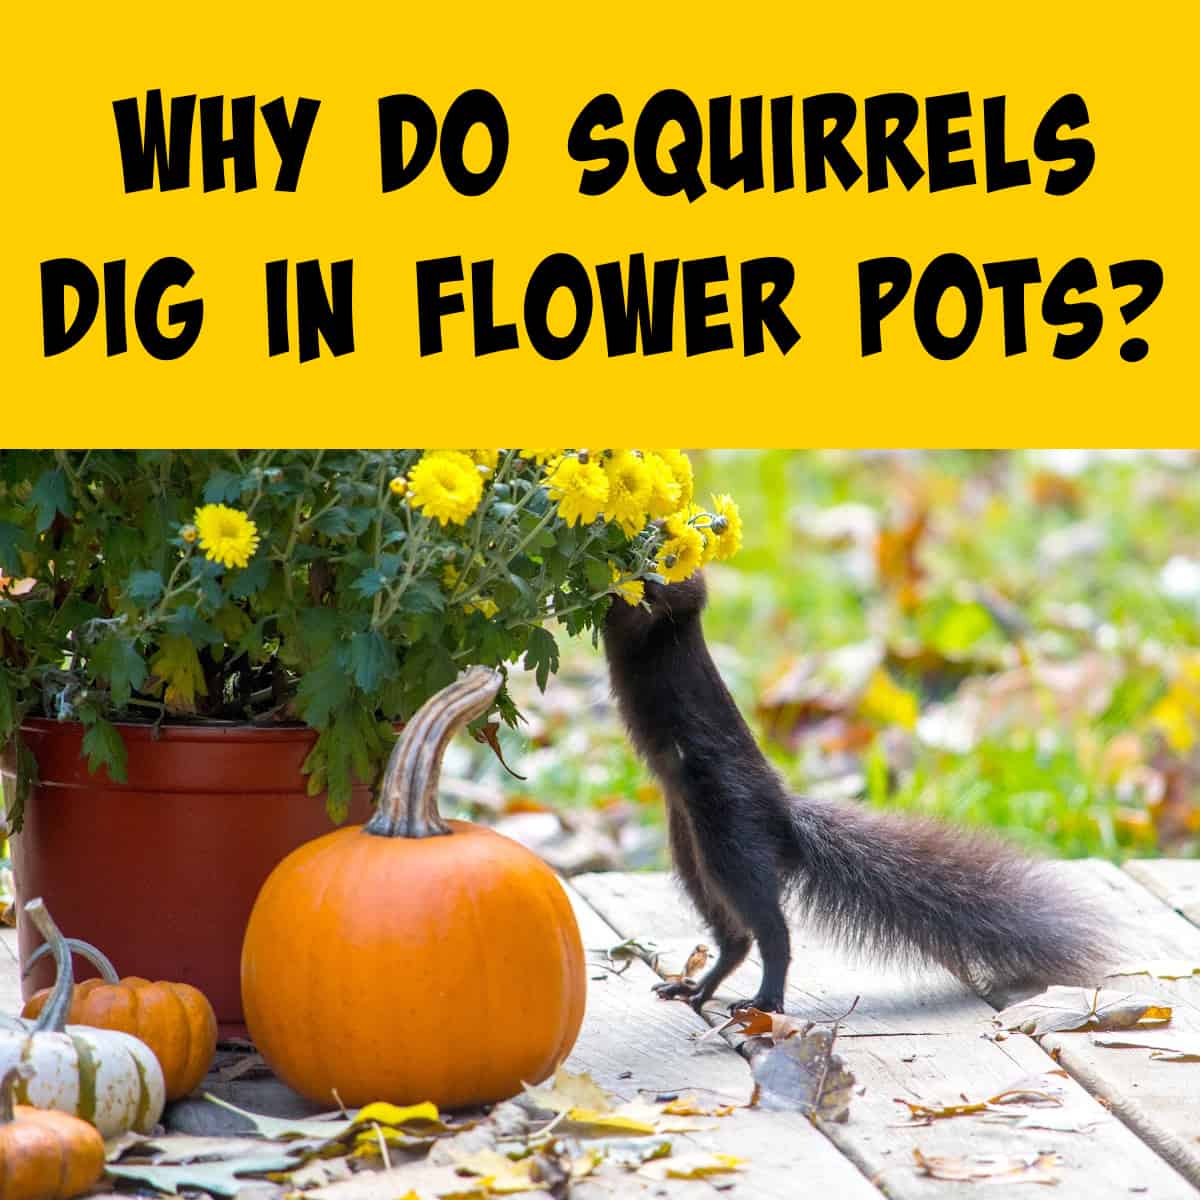 A squirrel digging in a pot of flowers